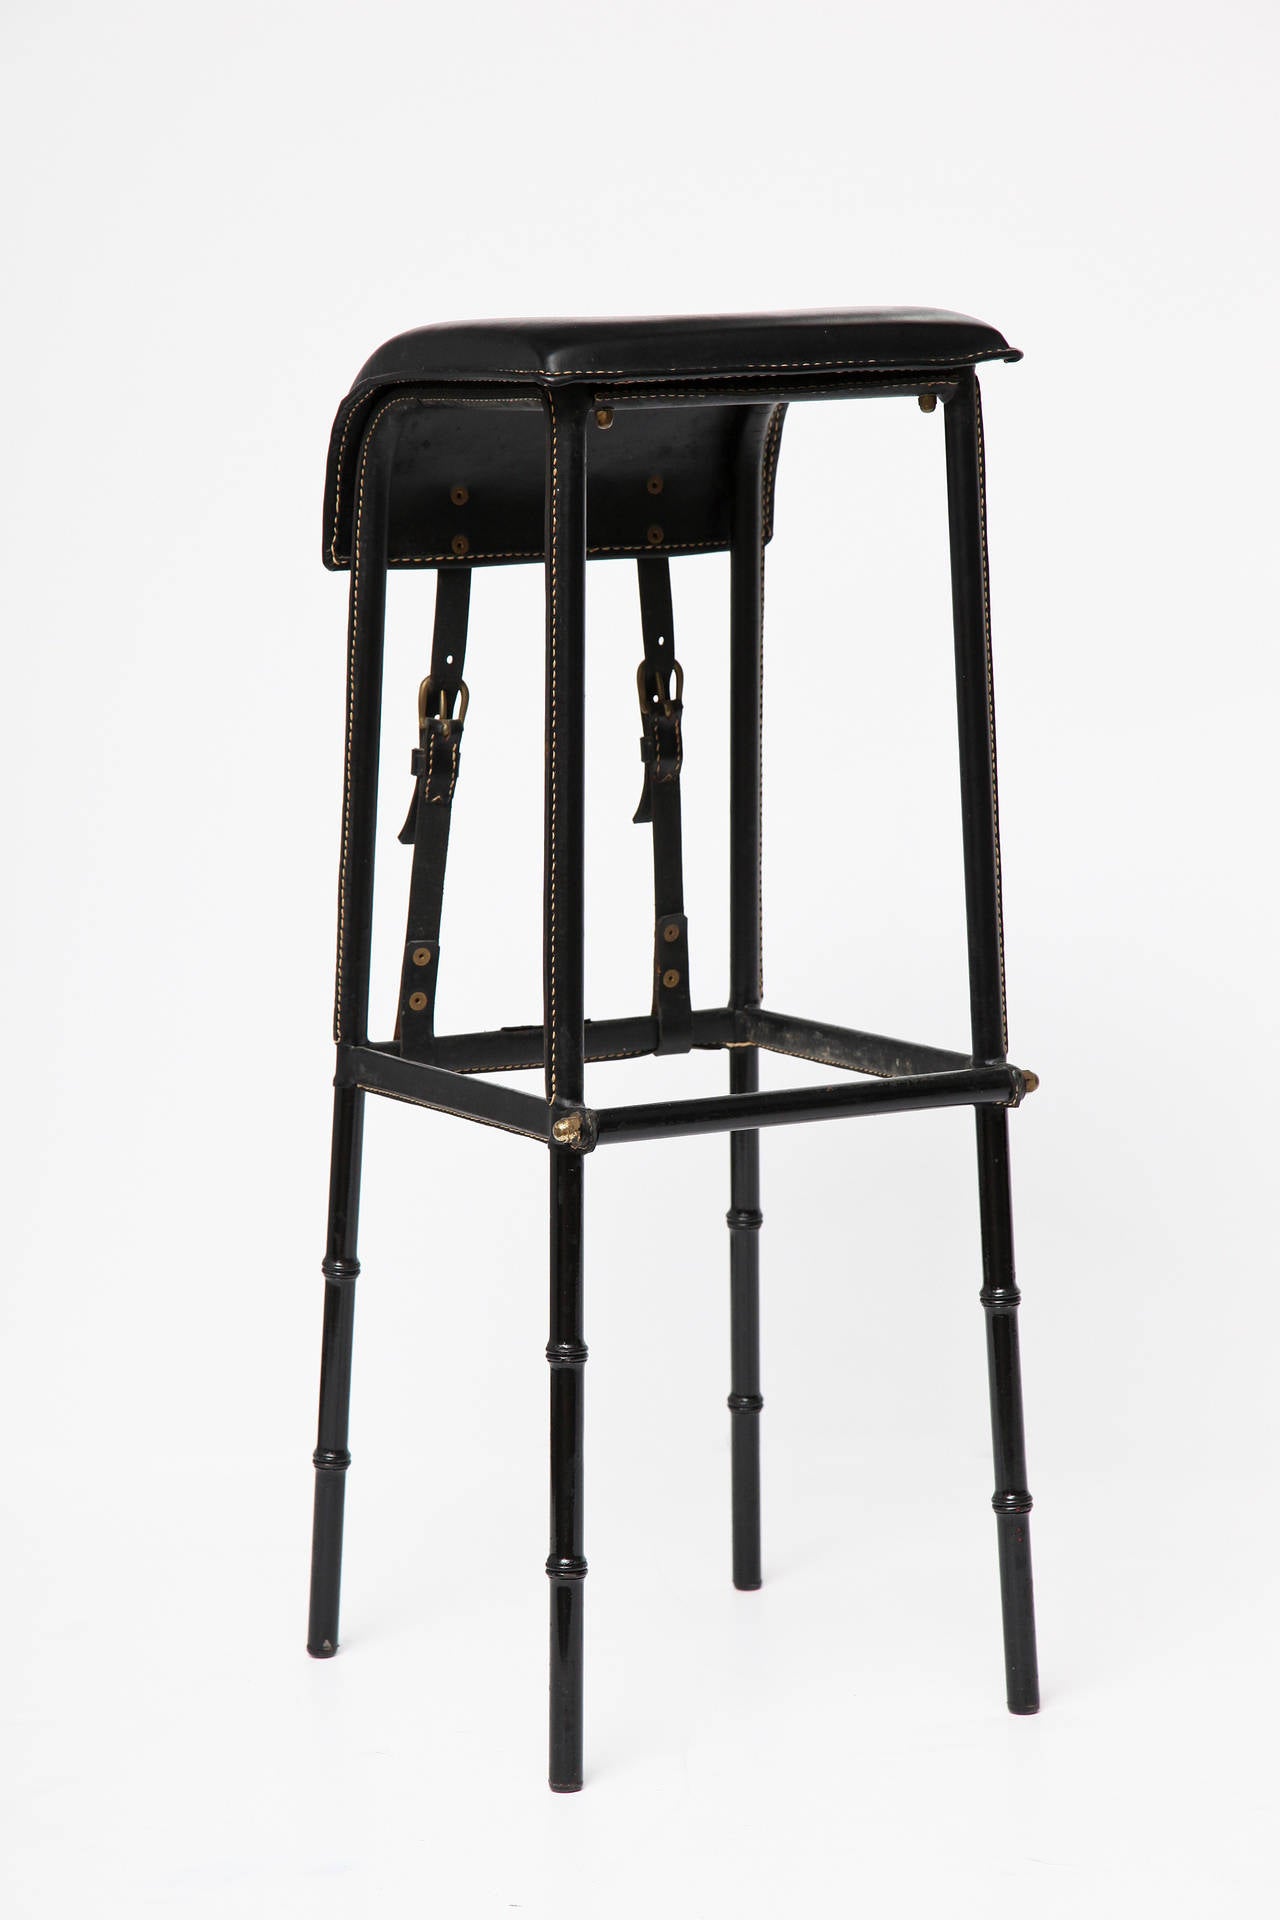 French Jacques Adnet, Pair of leather bar stools, France, c. 1950